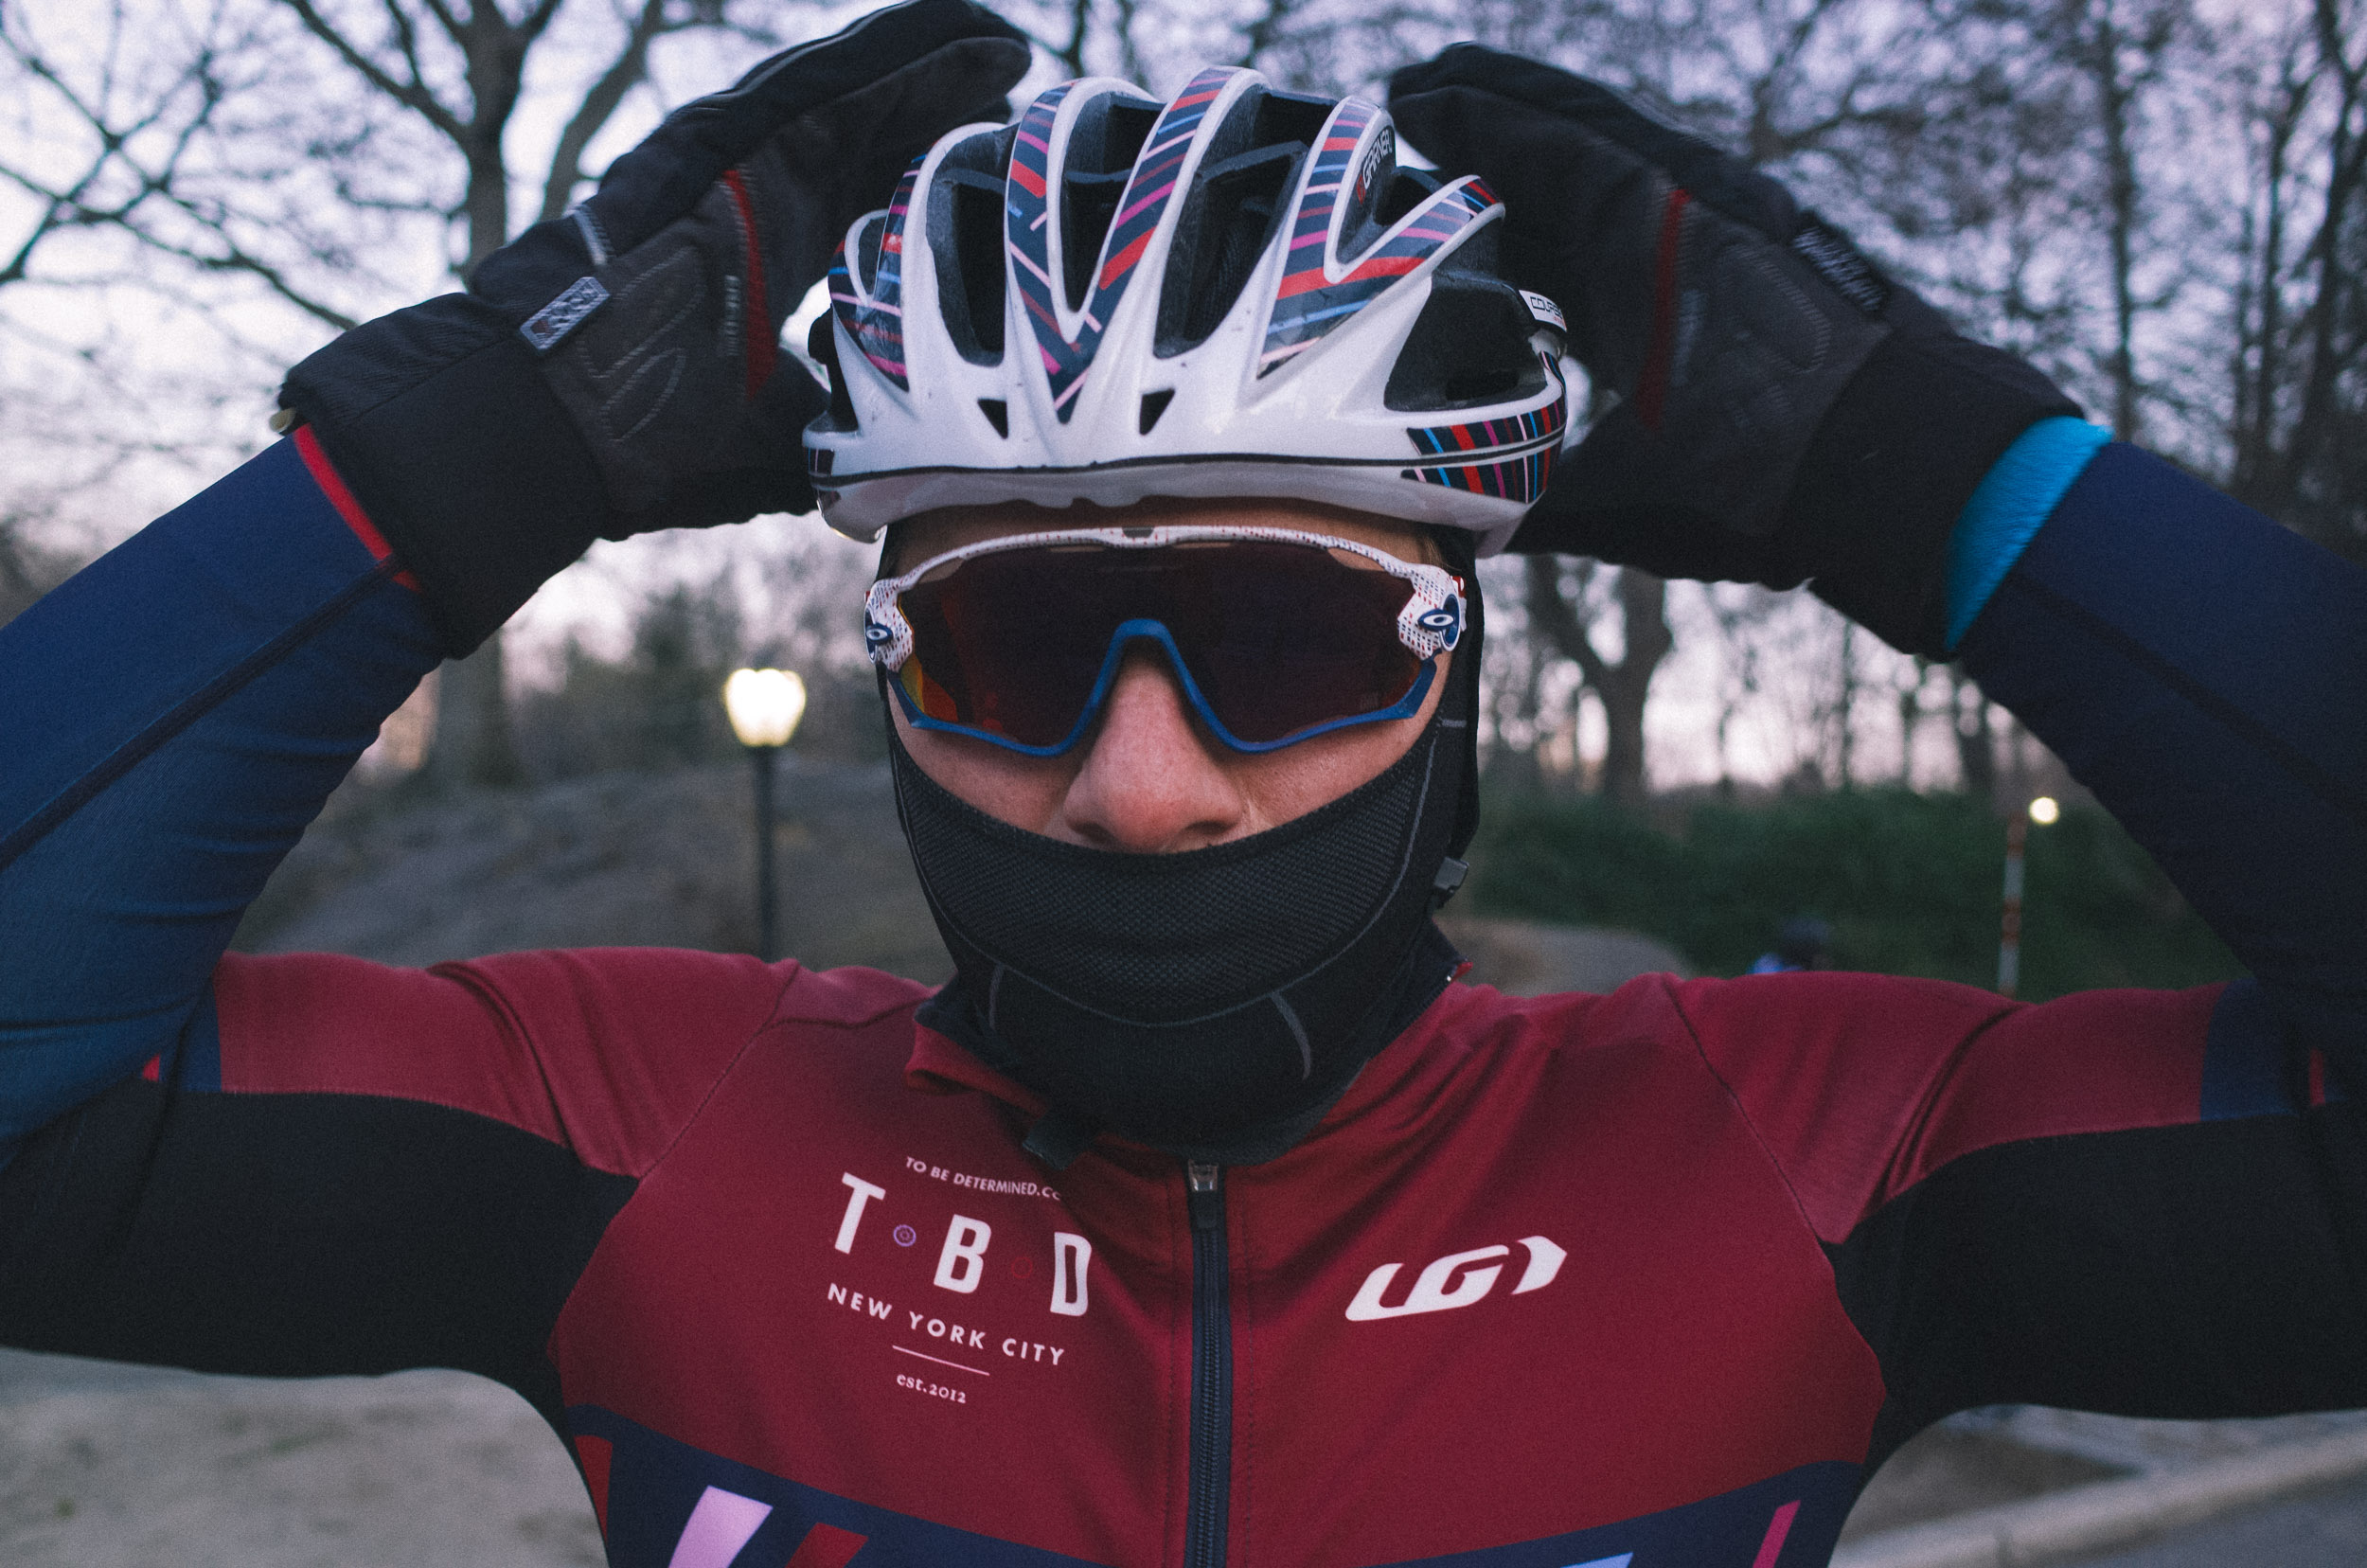 The Best Winter Cycling Kit and Apparel for Cold Weather — To Be